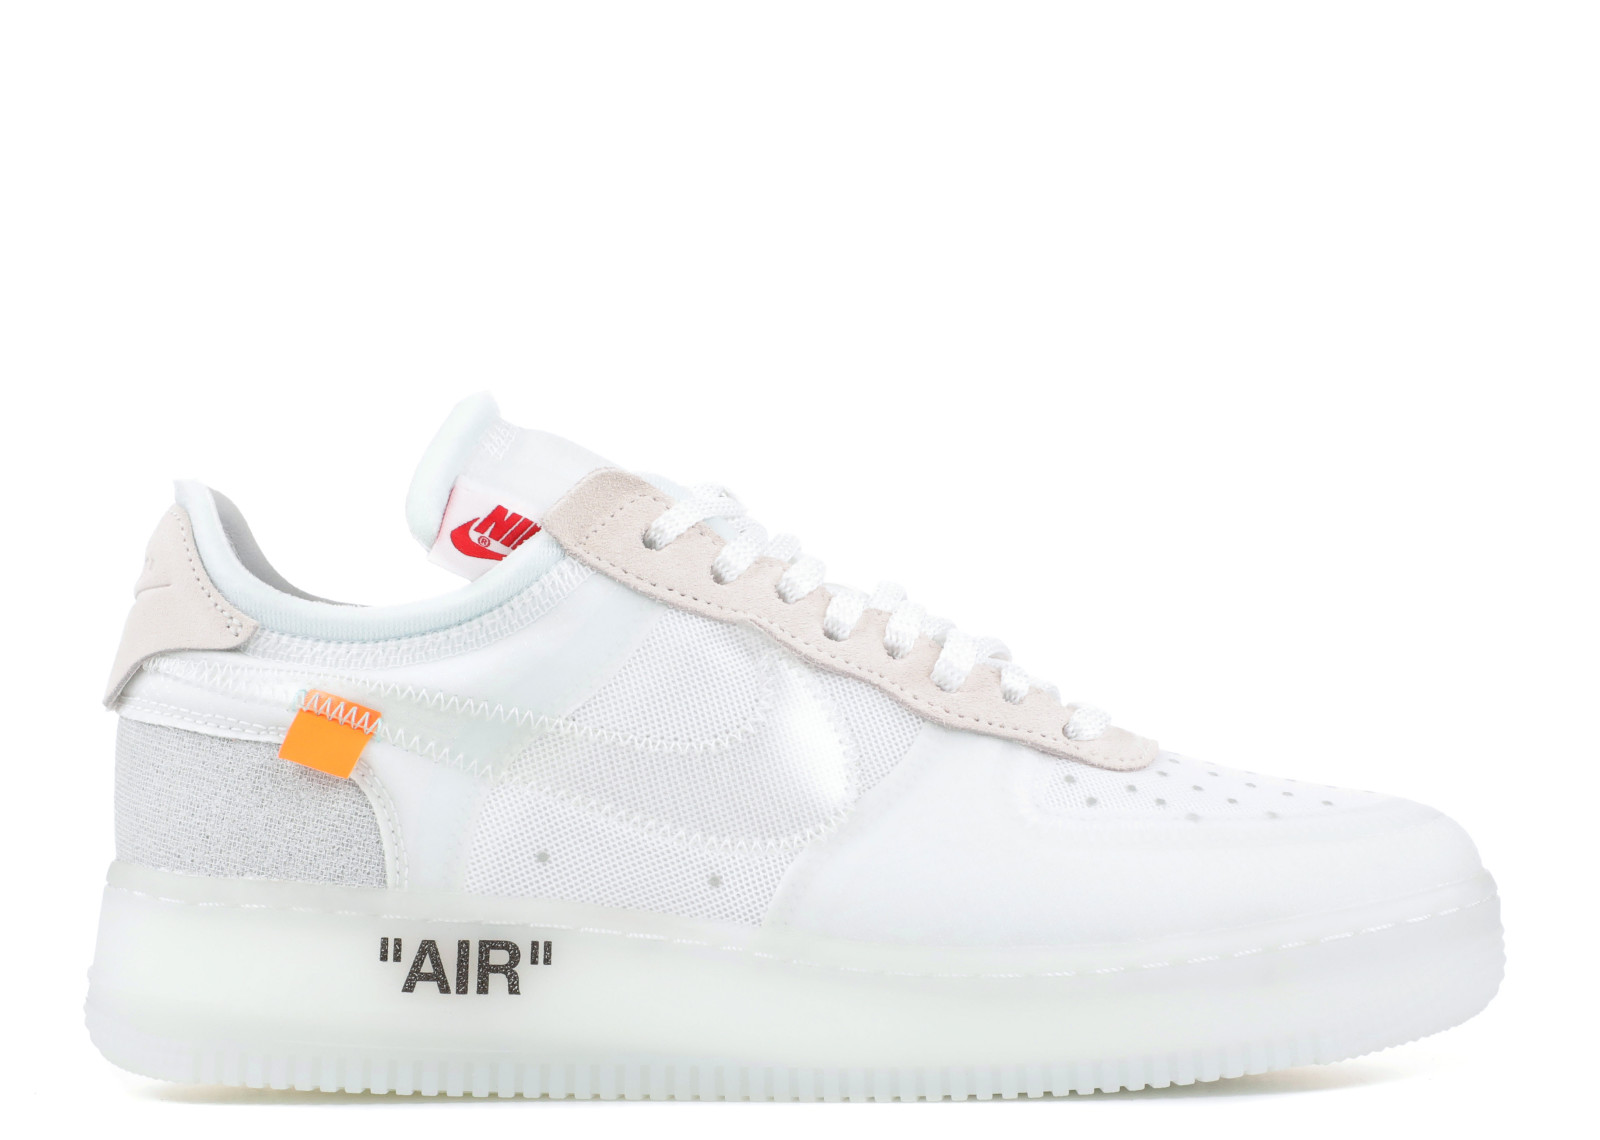 Off-White x NIKE The Ten Air Force 1 Low